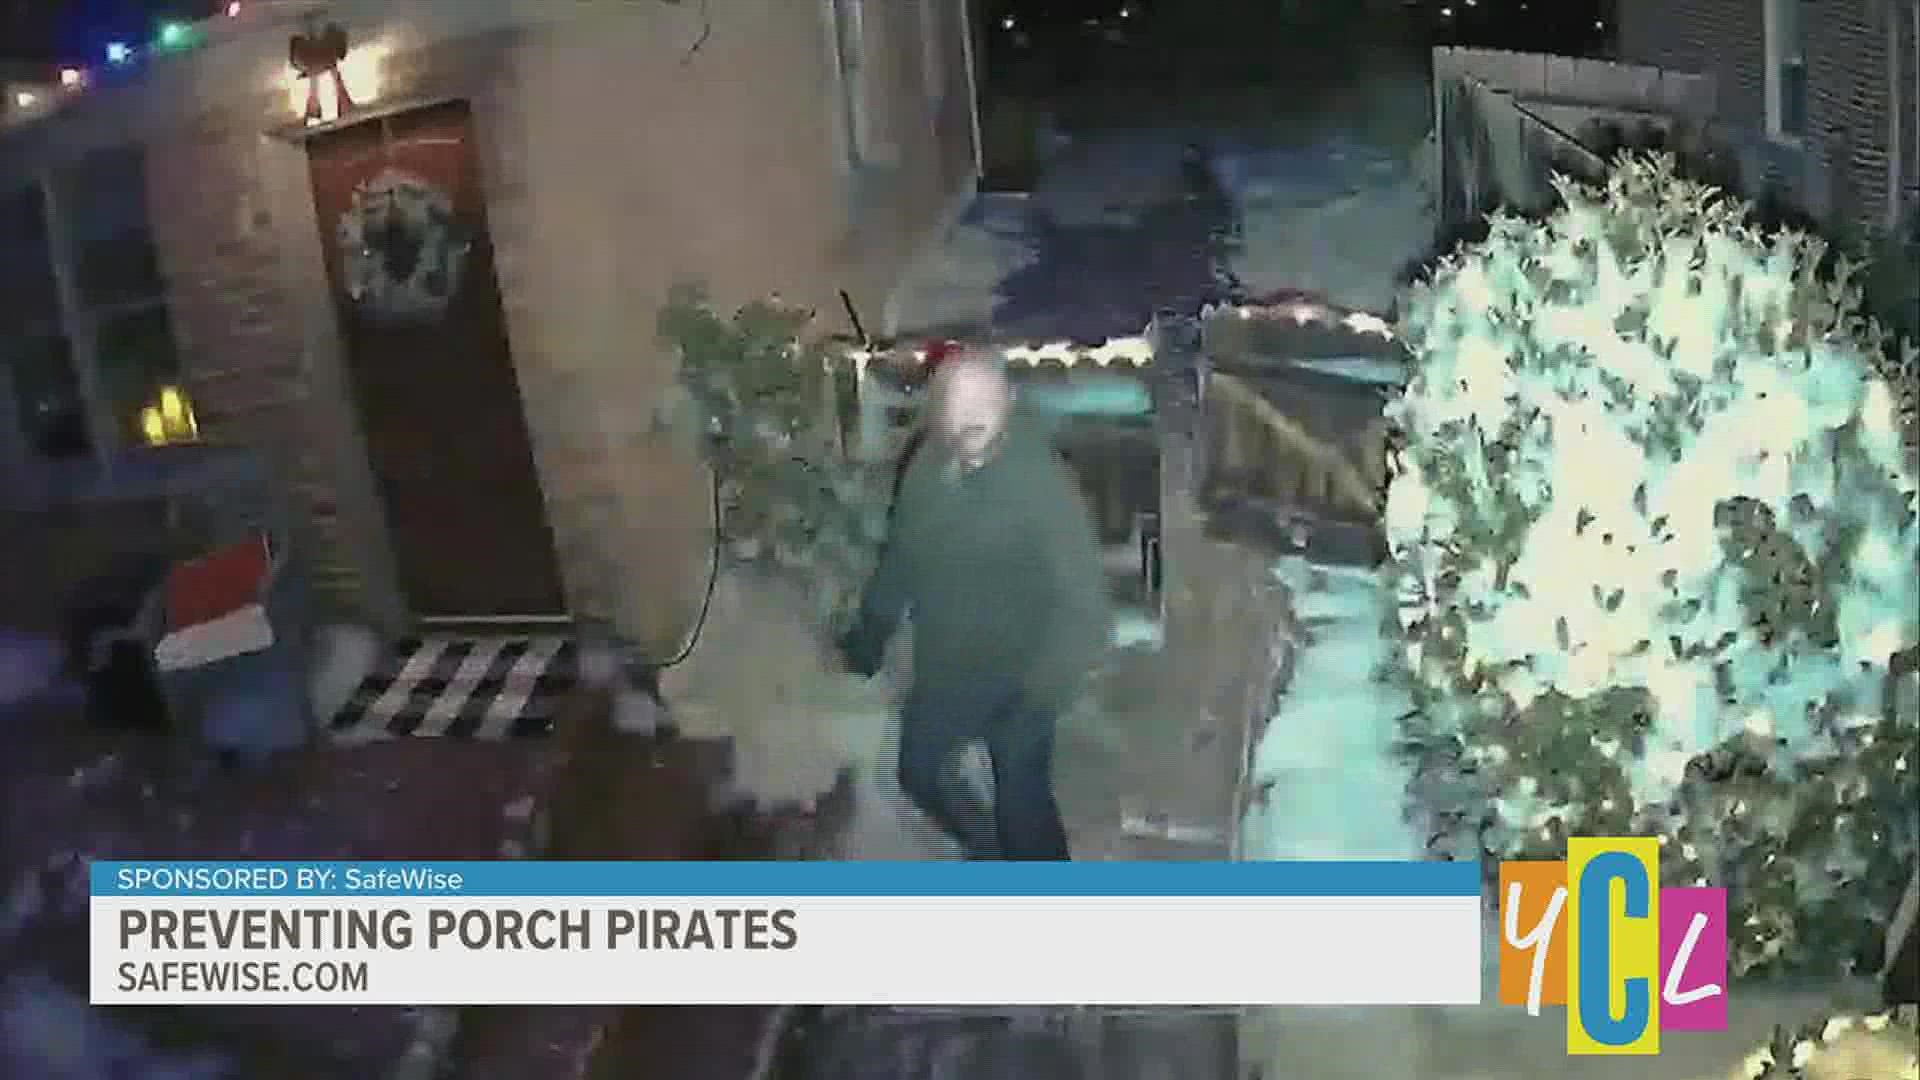 Prevent grinches from stealing your holiday packages with these home safety tips. This segment paid for by SafeWise.